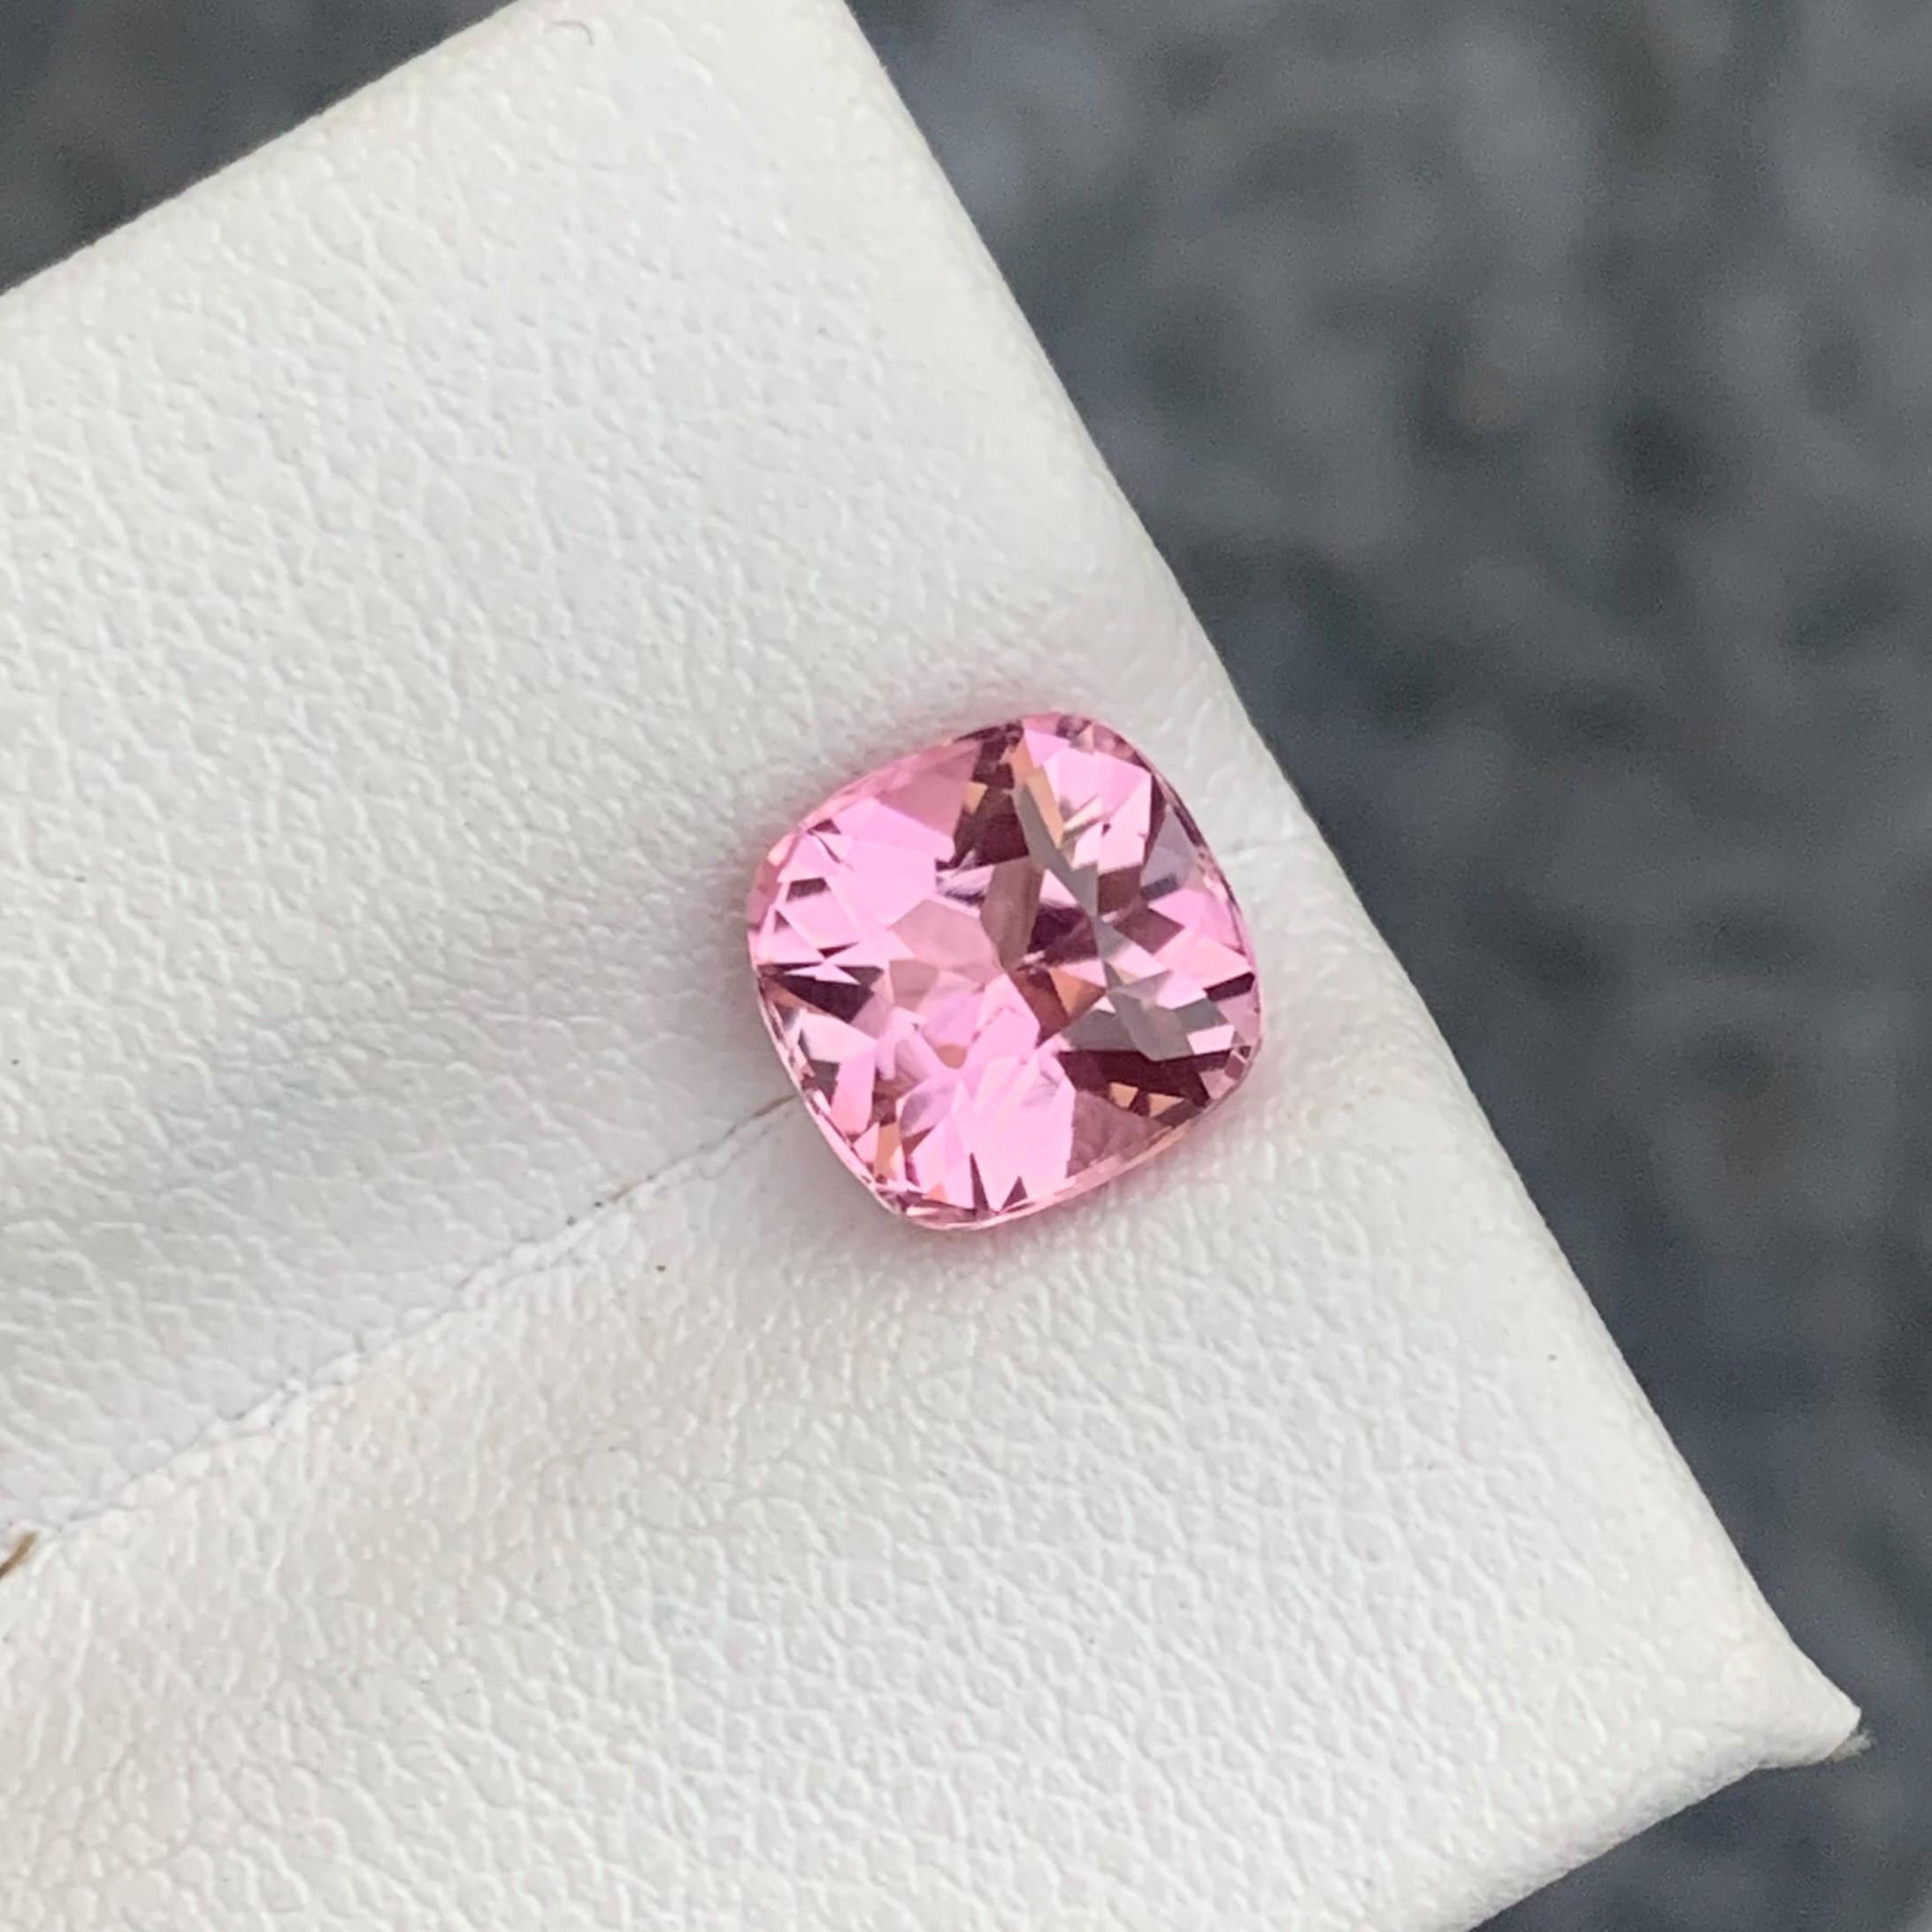 Faceted Tourmaline
Weight: 2.0 Carats
Dimension: 7.3x7.3x5.6 Mm
Origin: Kunar Afghanistan
Color: Pink
Shape: Cushion
Clarity: Eye Clean
Certificate: On Demand

With a rating between 7 and 7.5 on the Mohs scale of mineral hardness, tourmaline jewelry